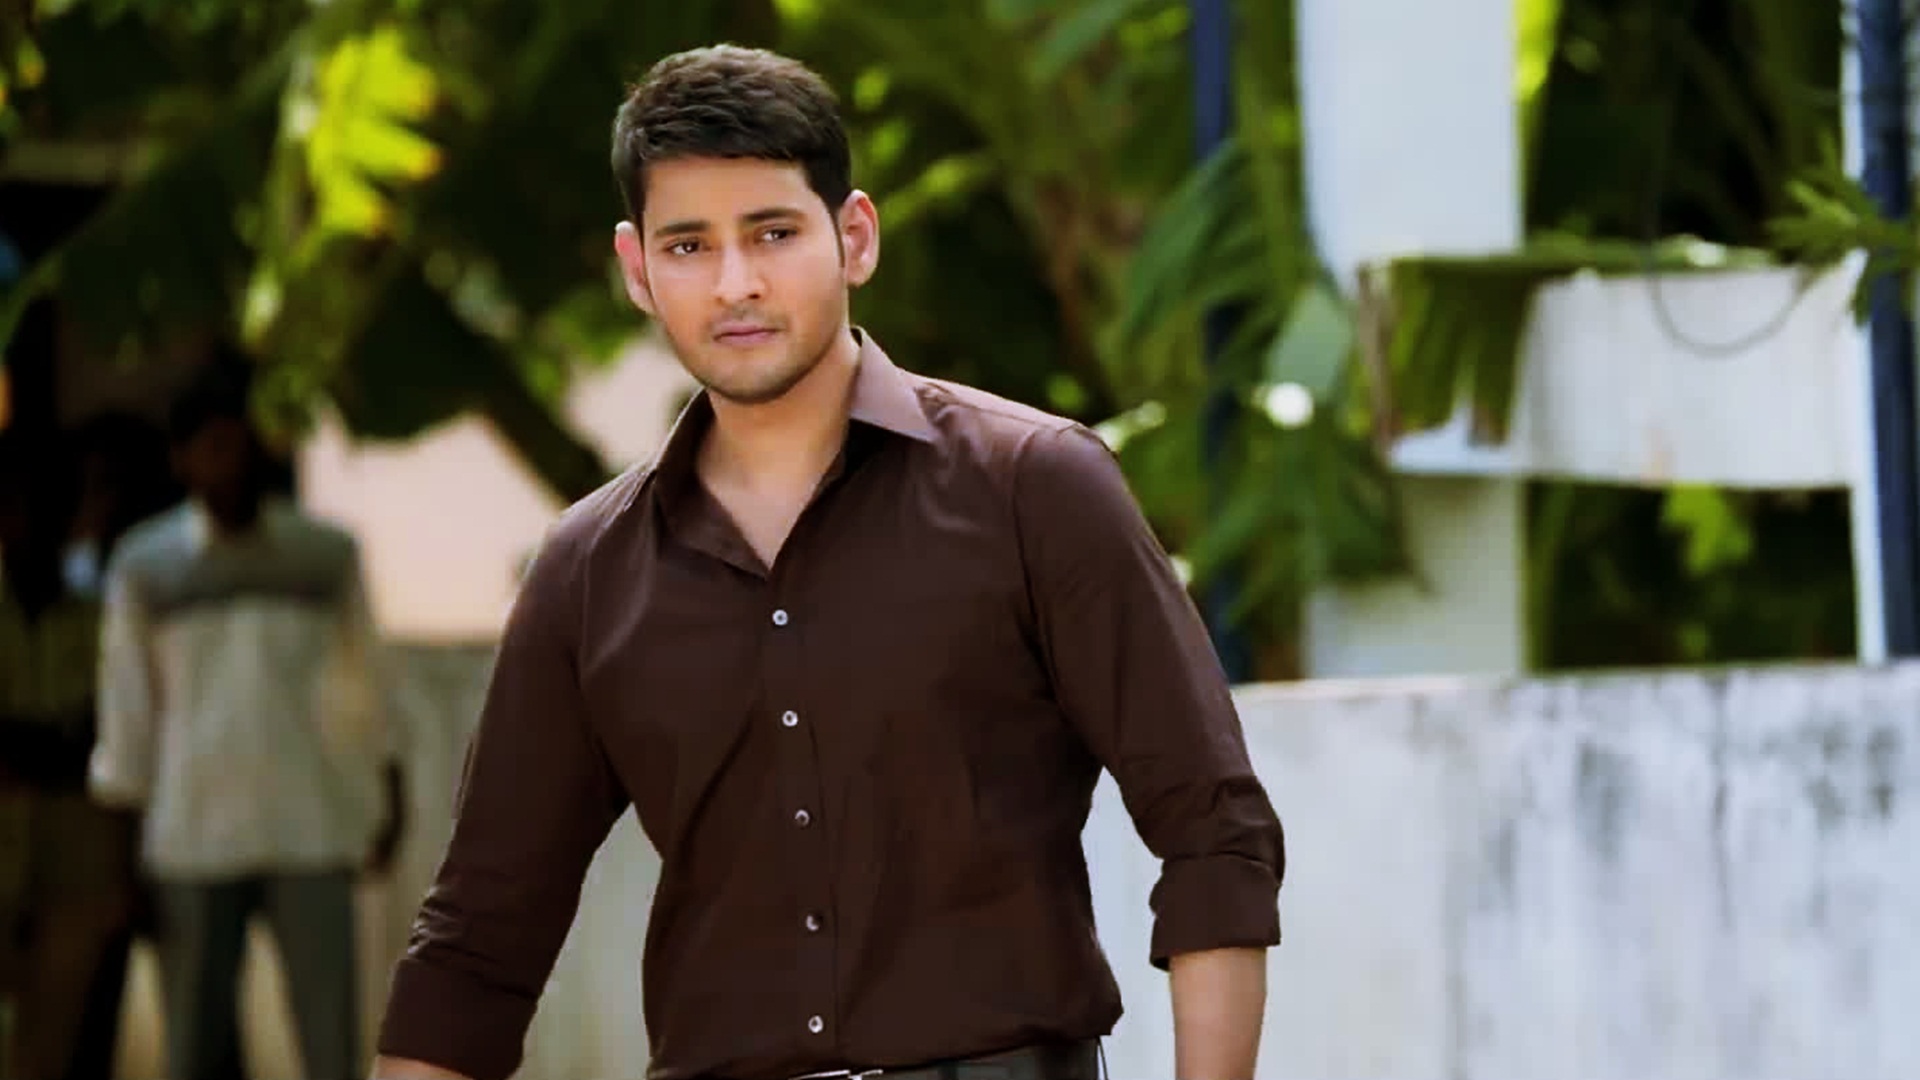 mahesh wallpapers hd,fashion,cool,outerwear,white collar worker,jacket